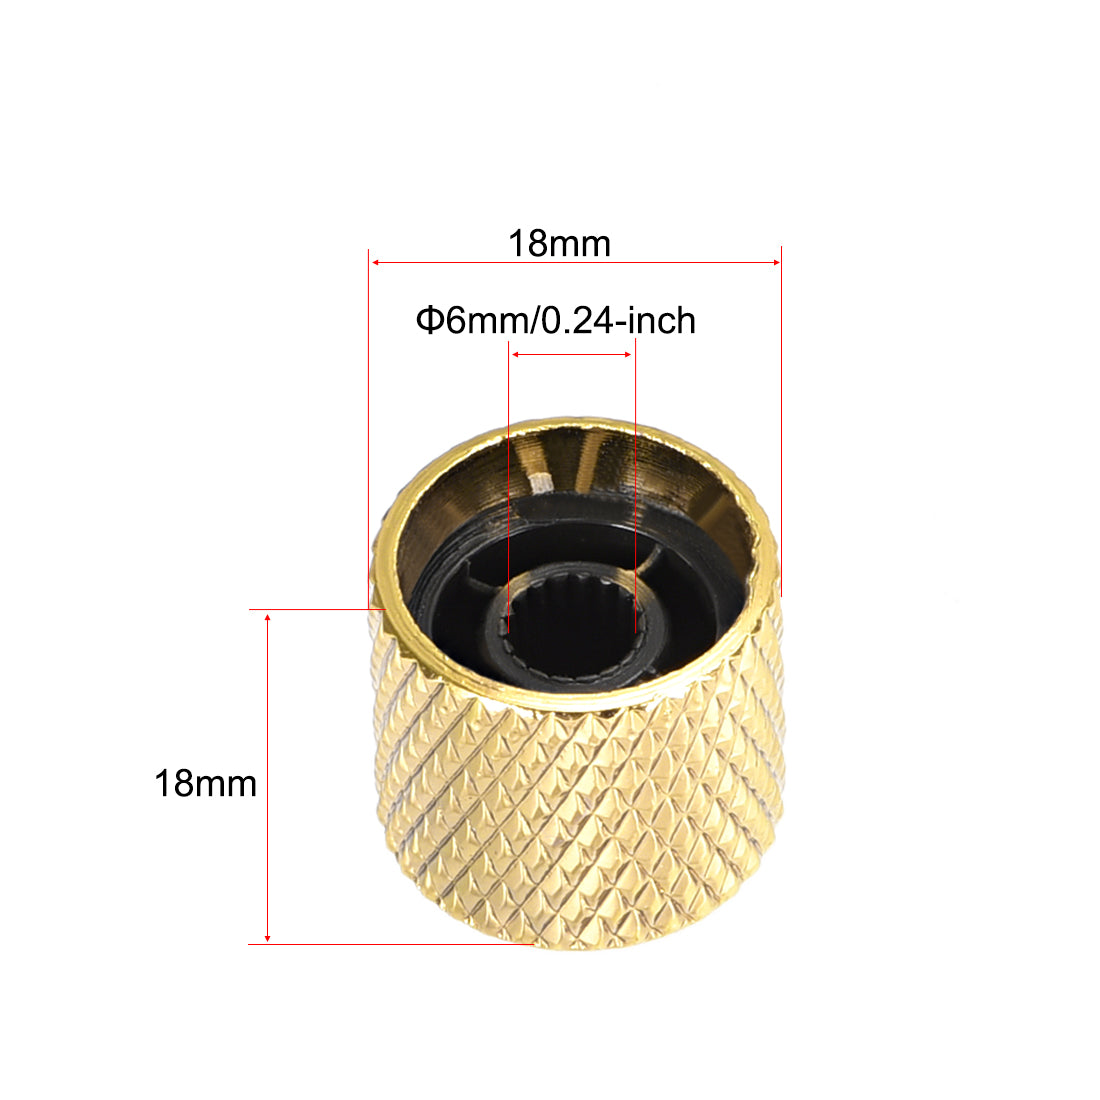 uxcell Uxcell 6mm Metal Potentiometer Control Knobs for Electric Guitar Bass Volume Tone Knobs Gold Tone 4pcs